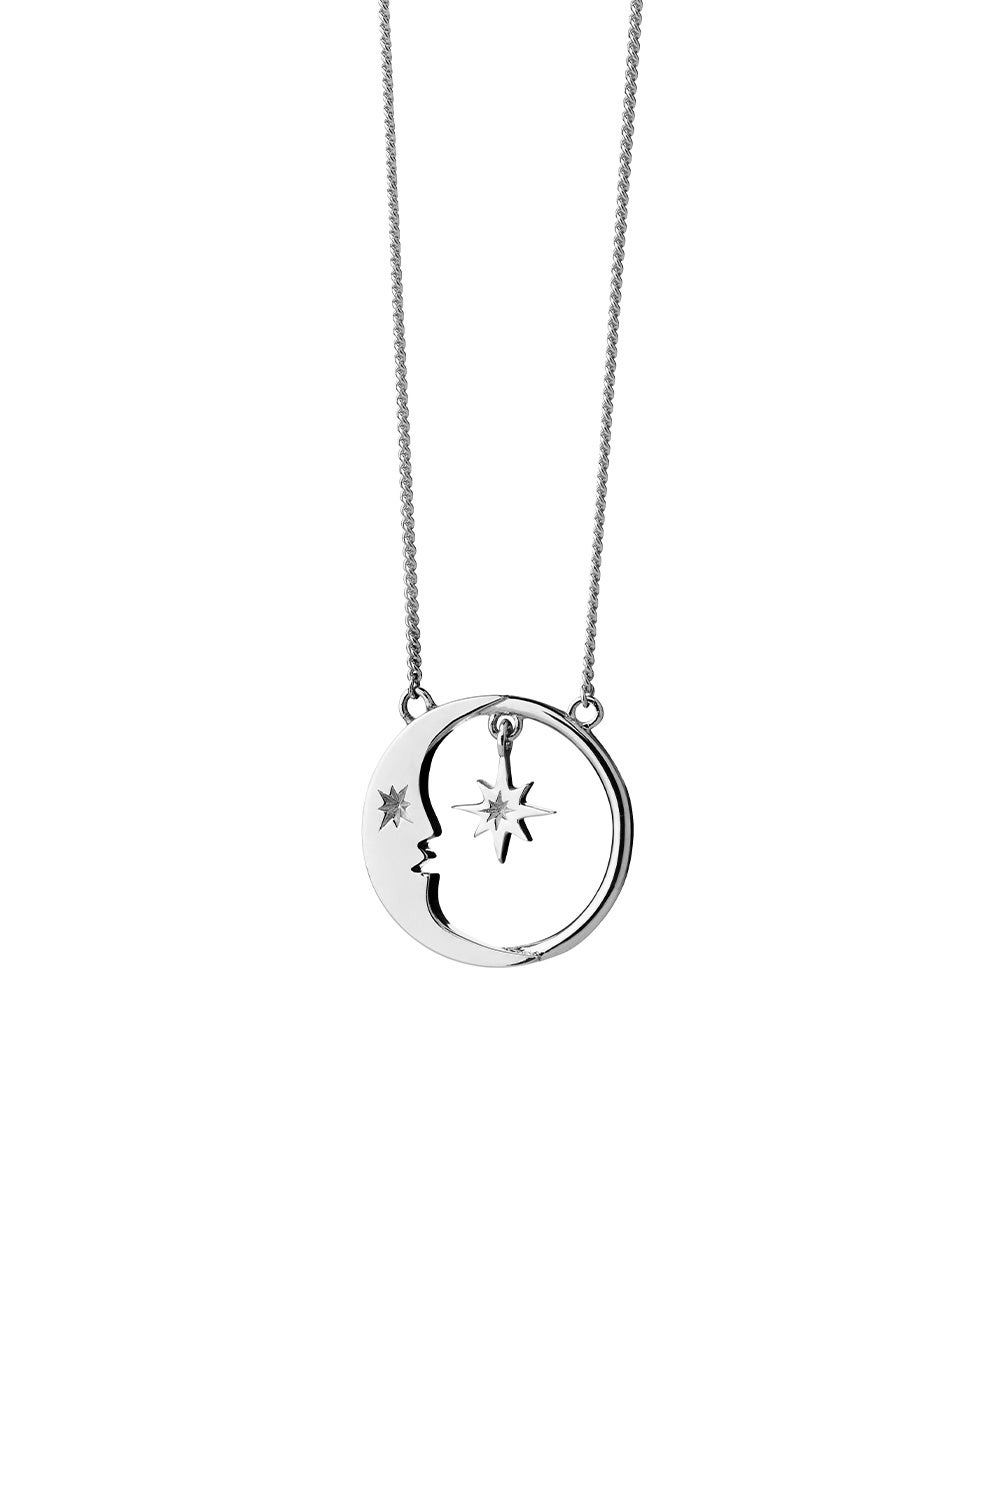 Eclipse Moon and Star Necklace Silver